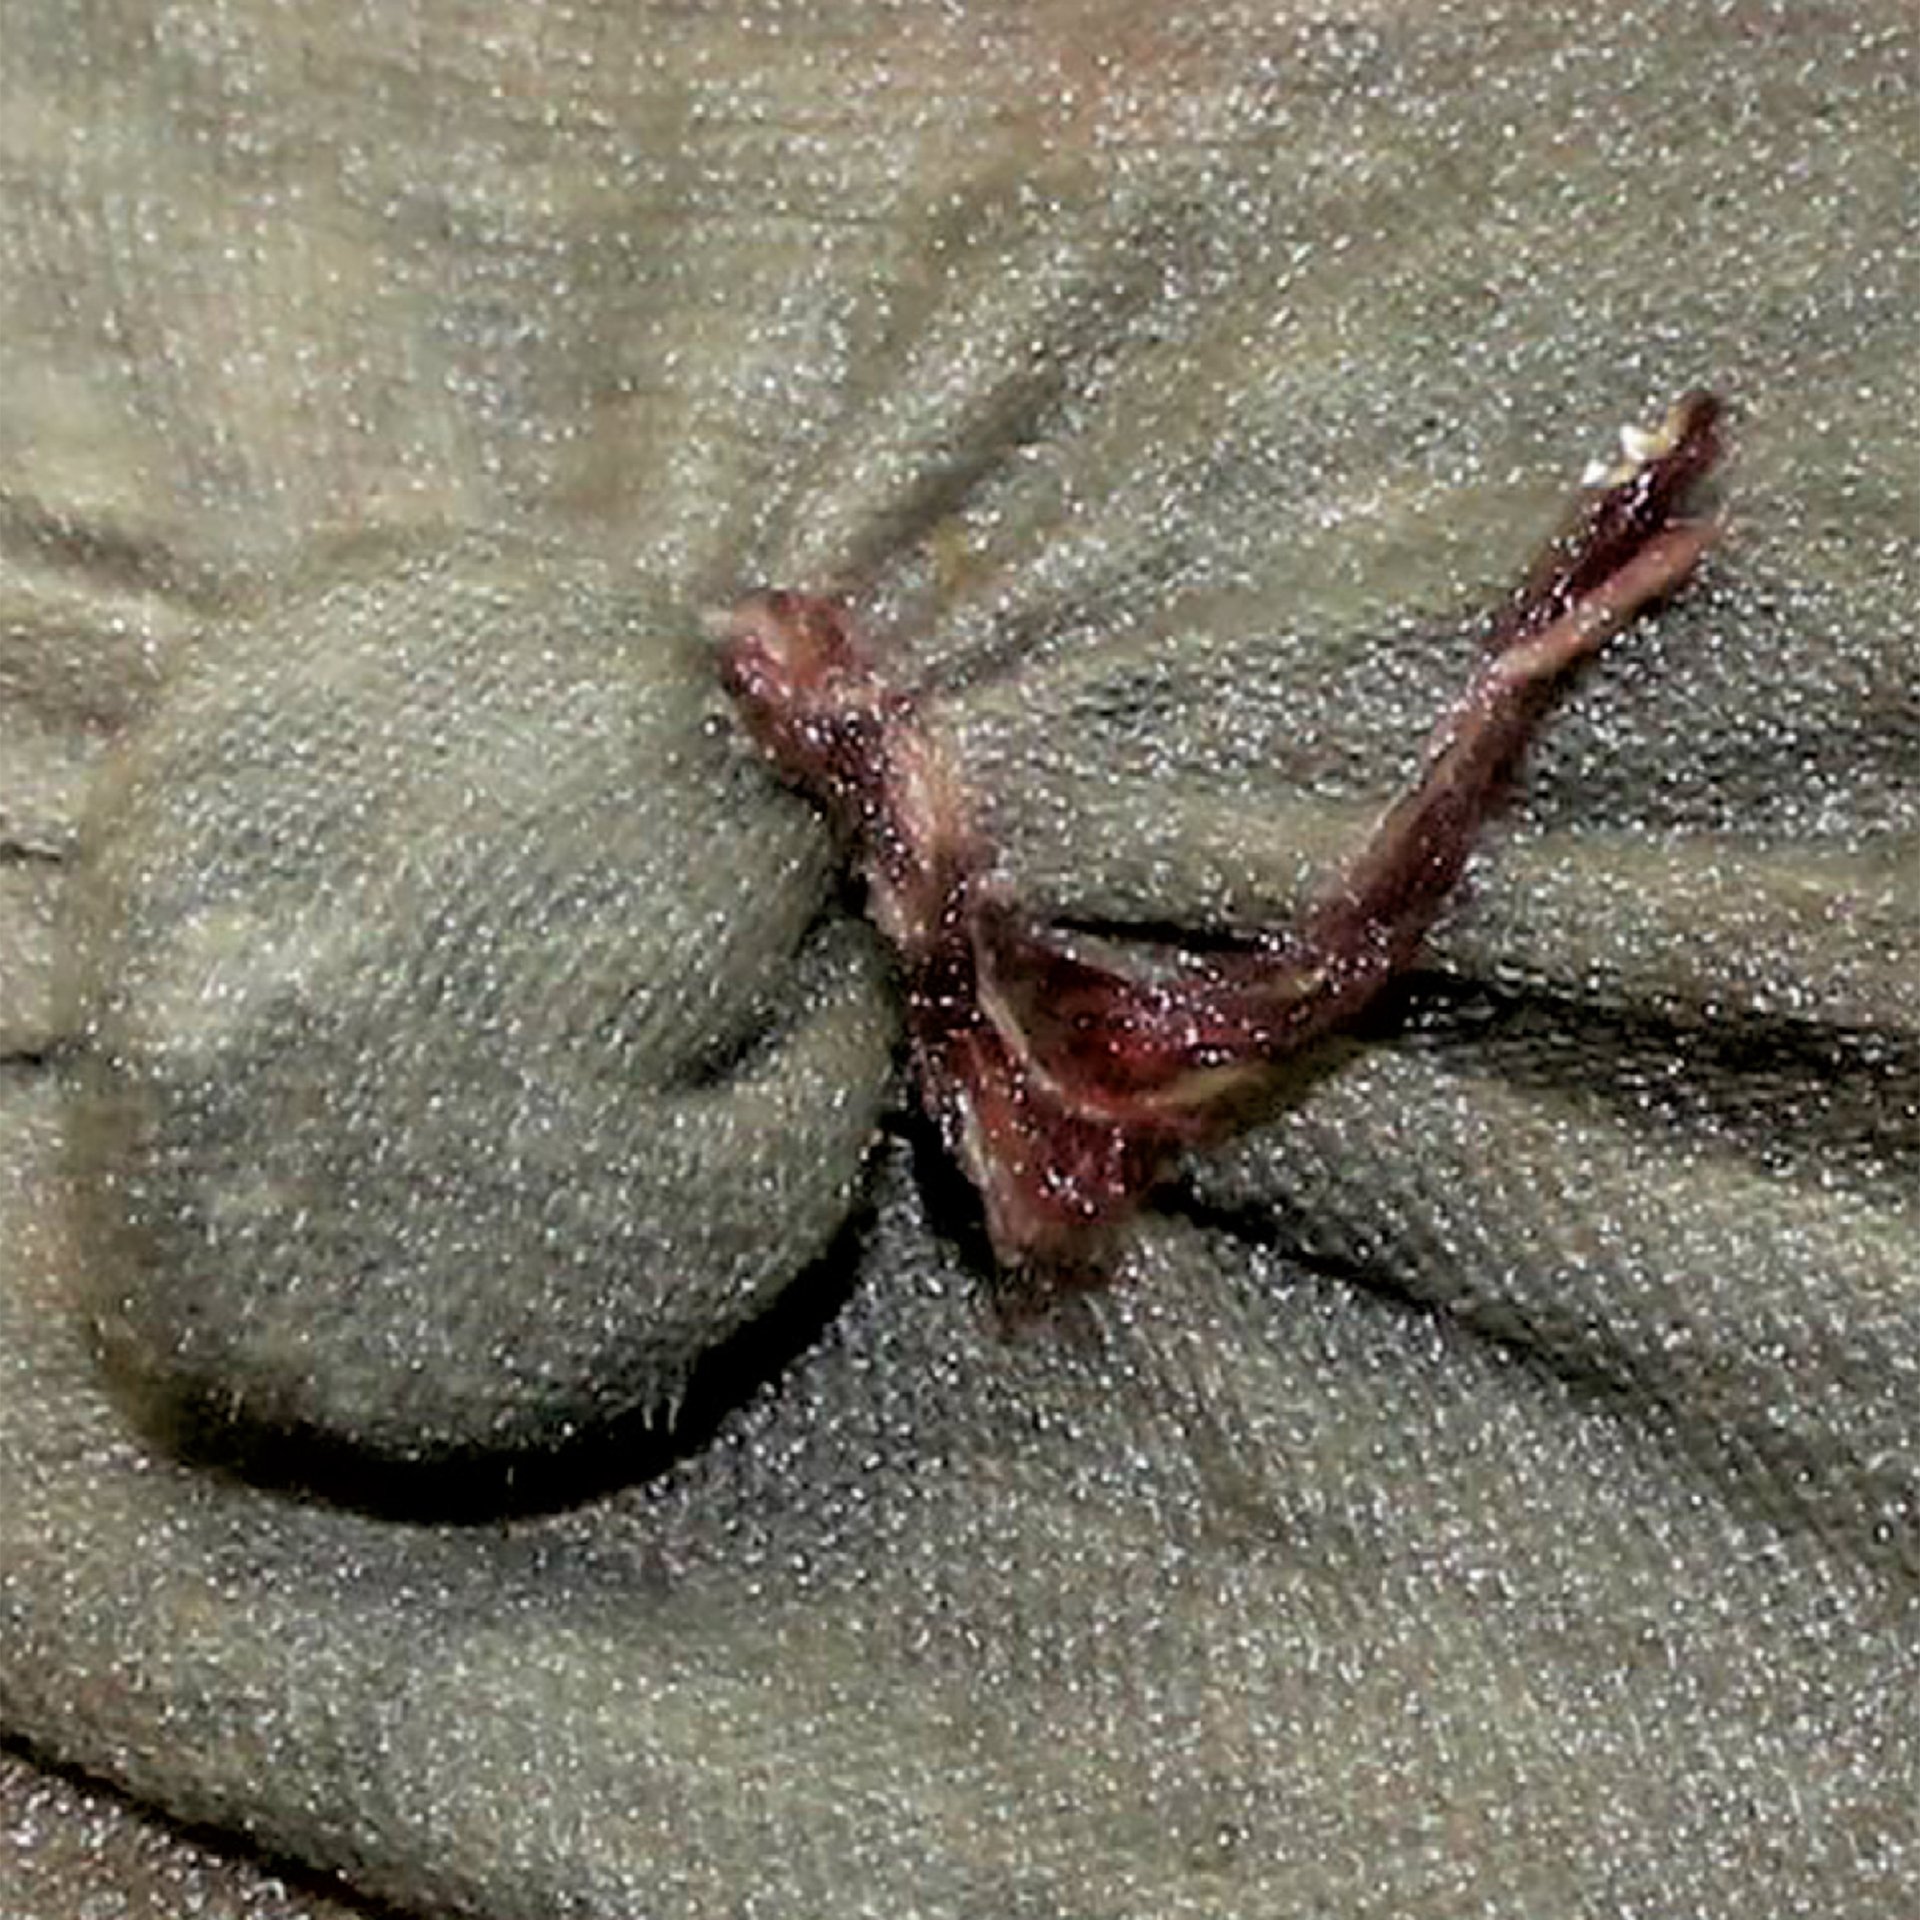 This tiny pouch of soil was tied into an Eritrean migrant's shirt